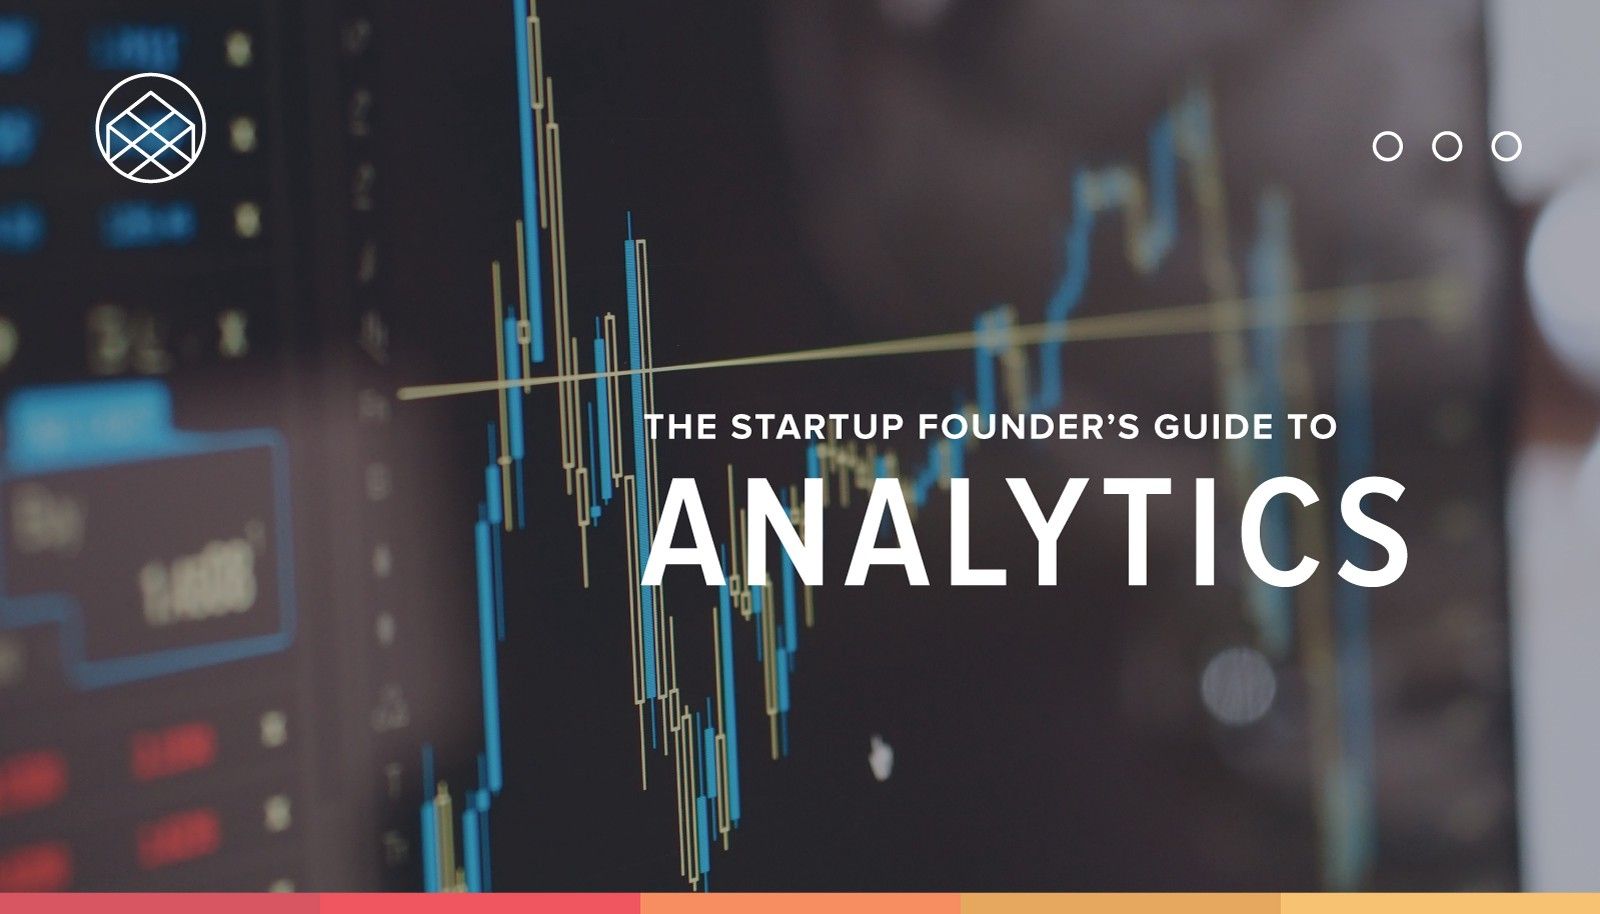 The startup founder's guide to analytics